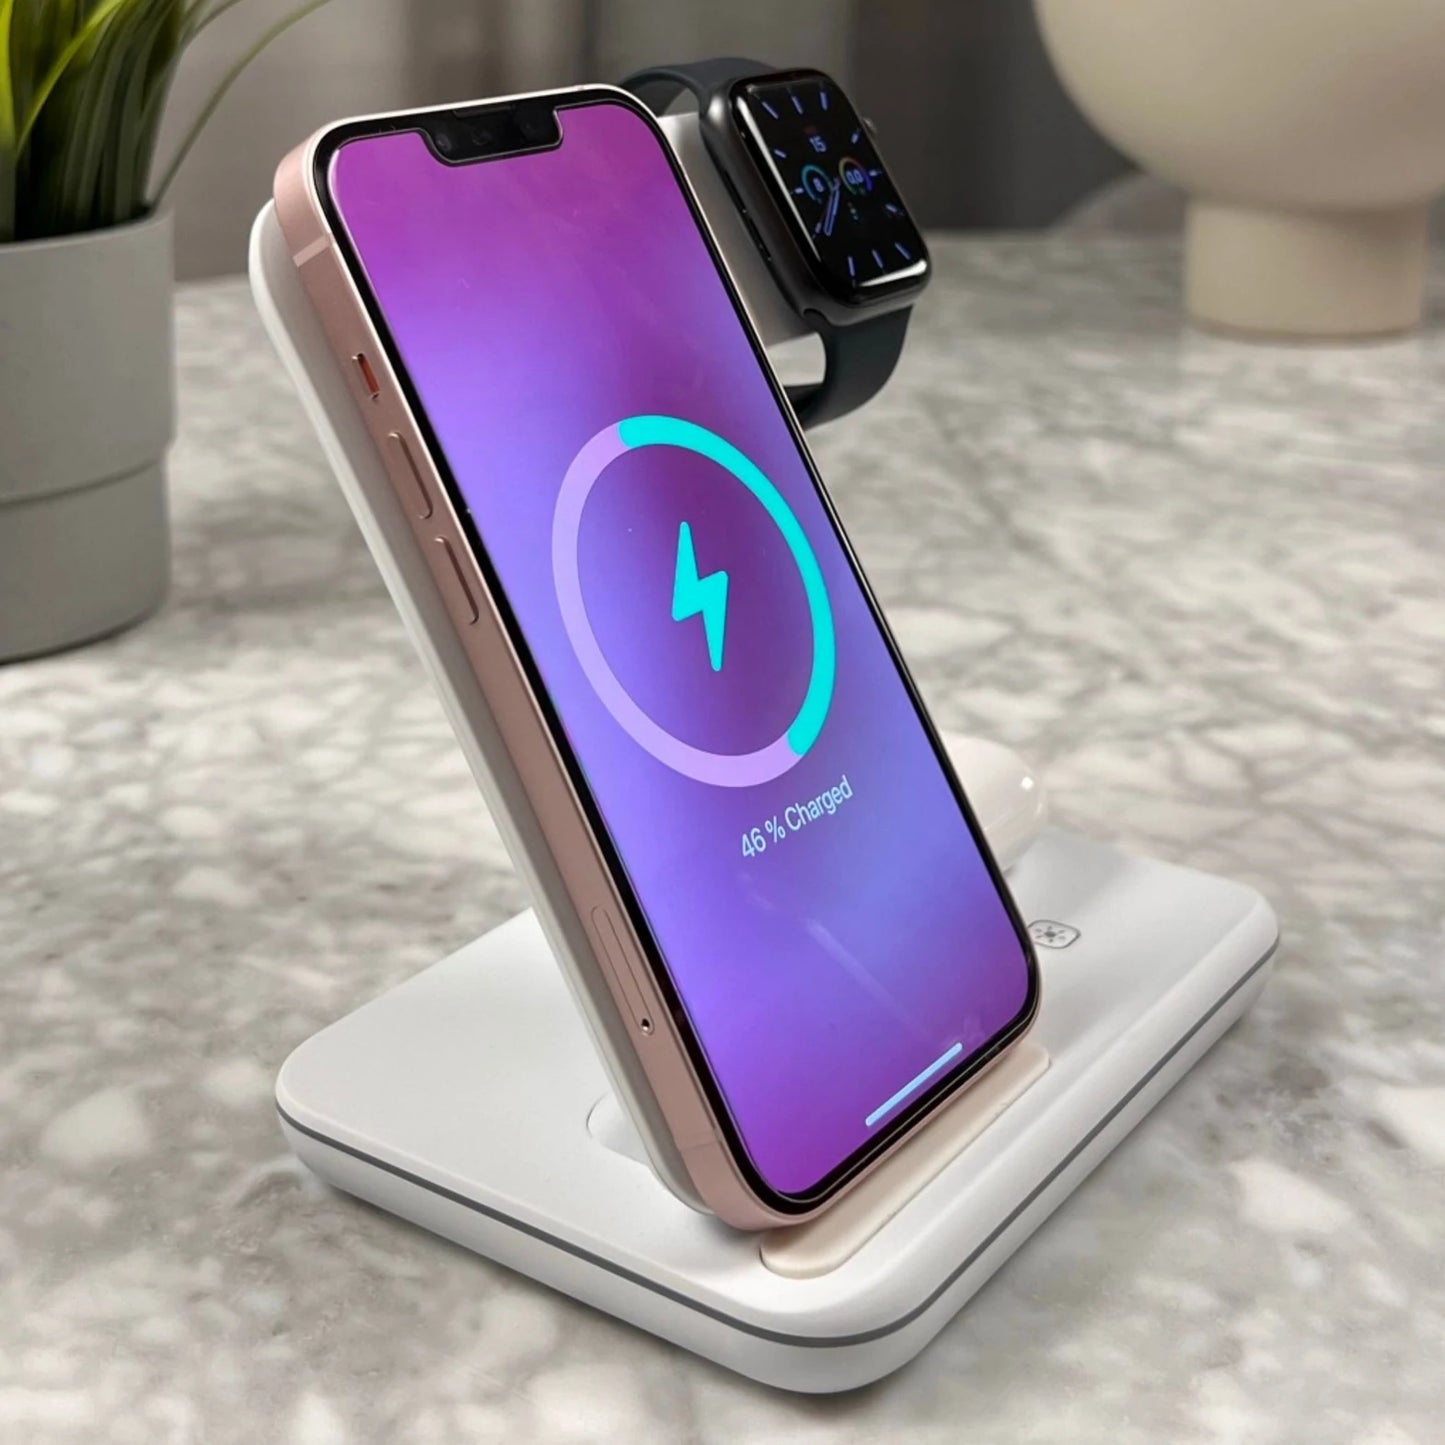 3 in 1 Apple Wireless Charging Station